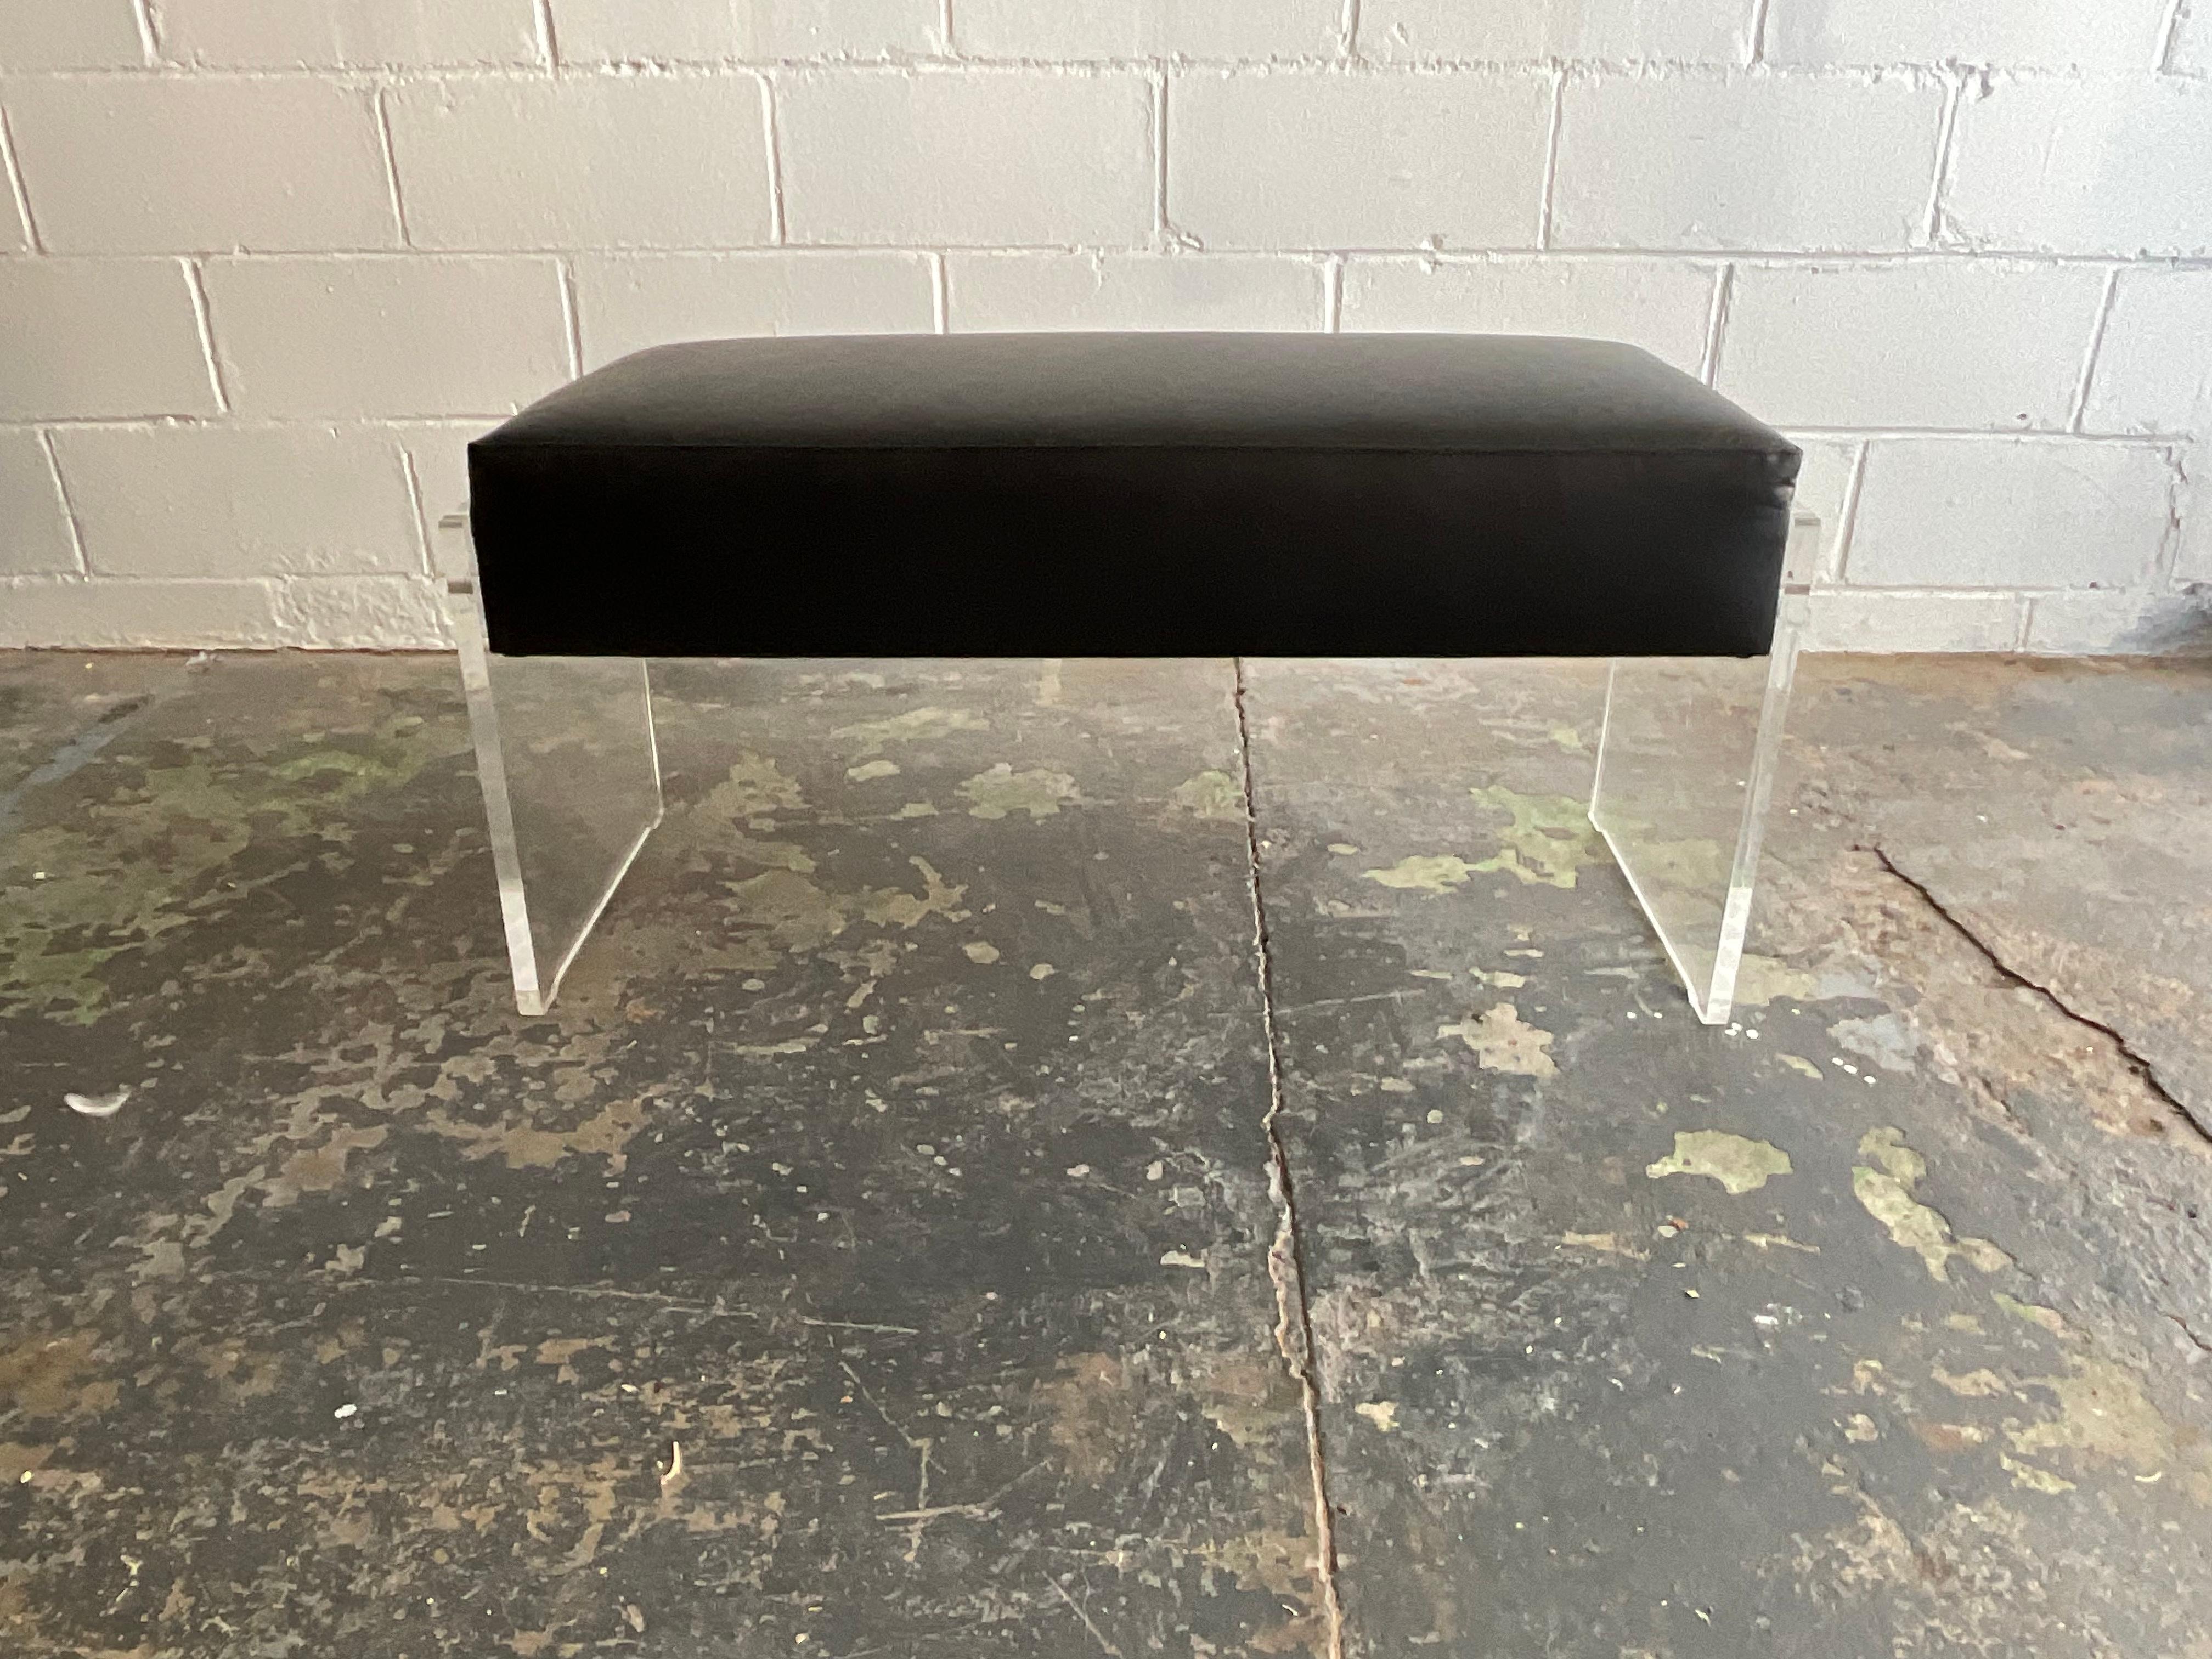 Vintage Lucite, Chrome & Black Leather Bench with Storage Compartment, 1970s In Excellent Condition For Sale In Brooklyn, NY